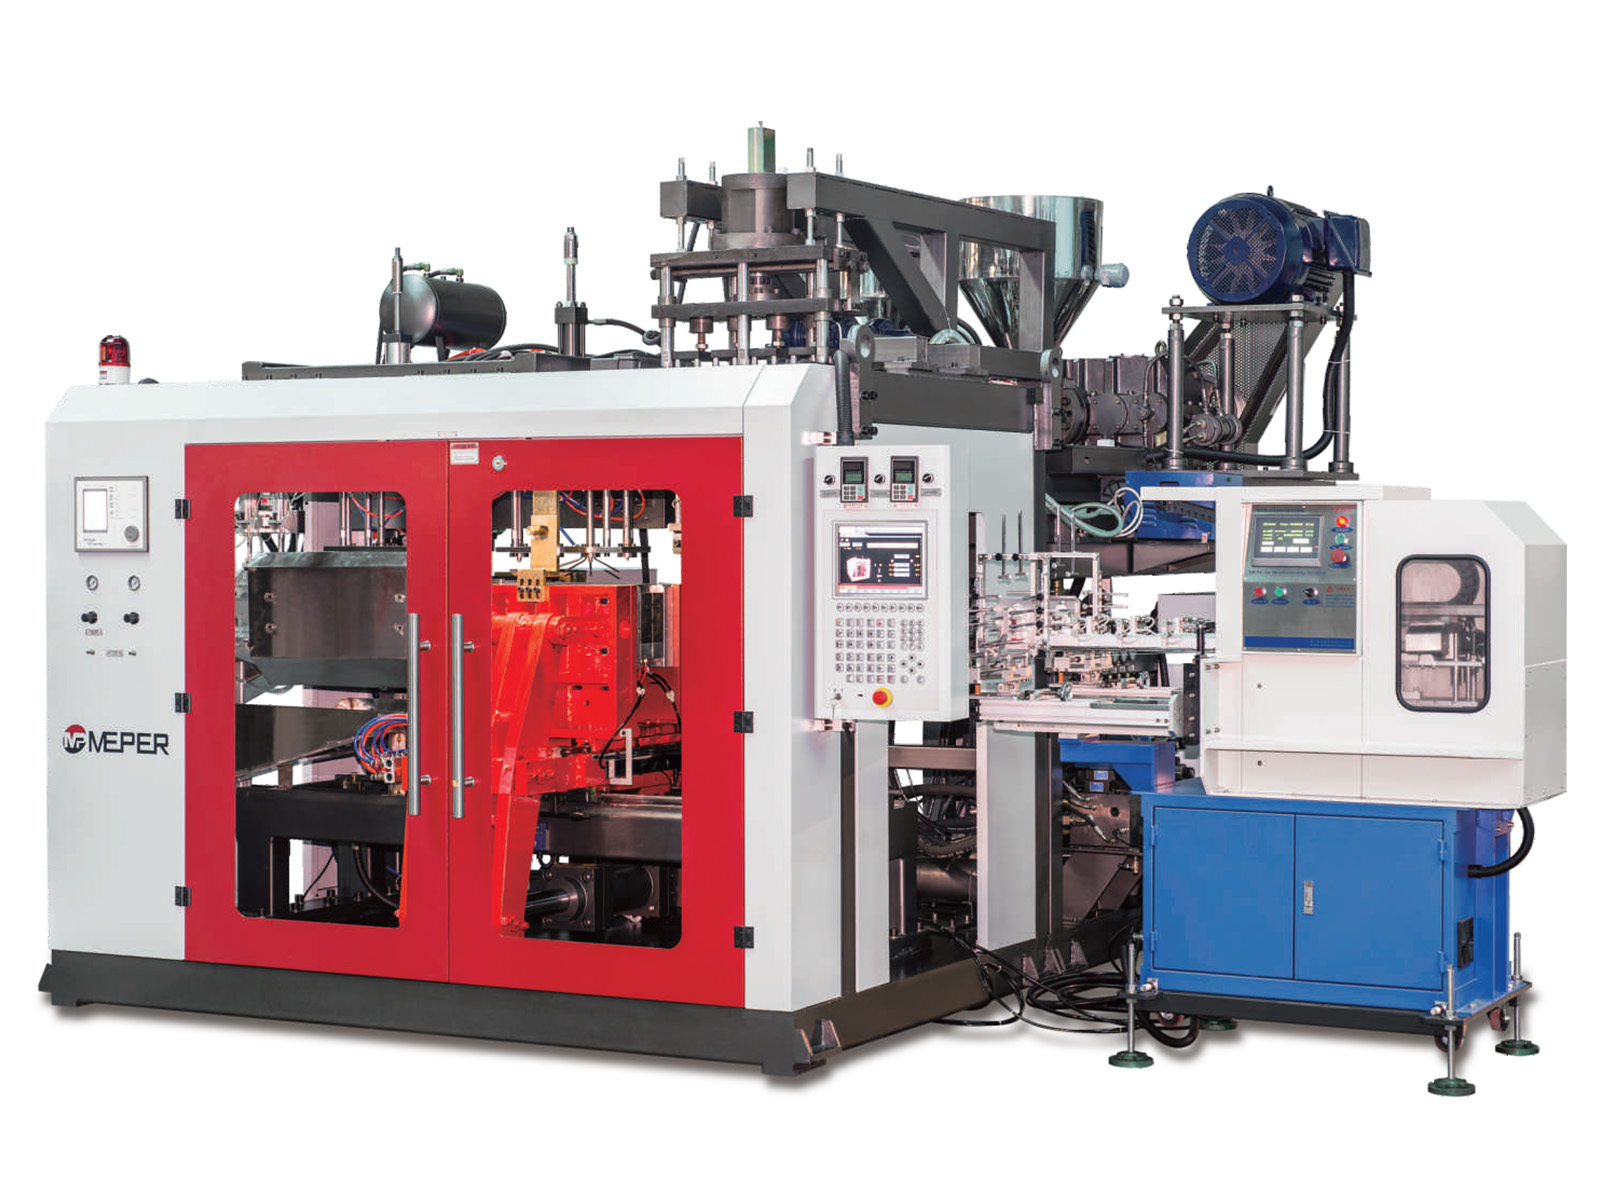 In mold laebling machine IML for blow molding machine